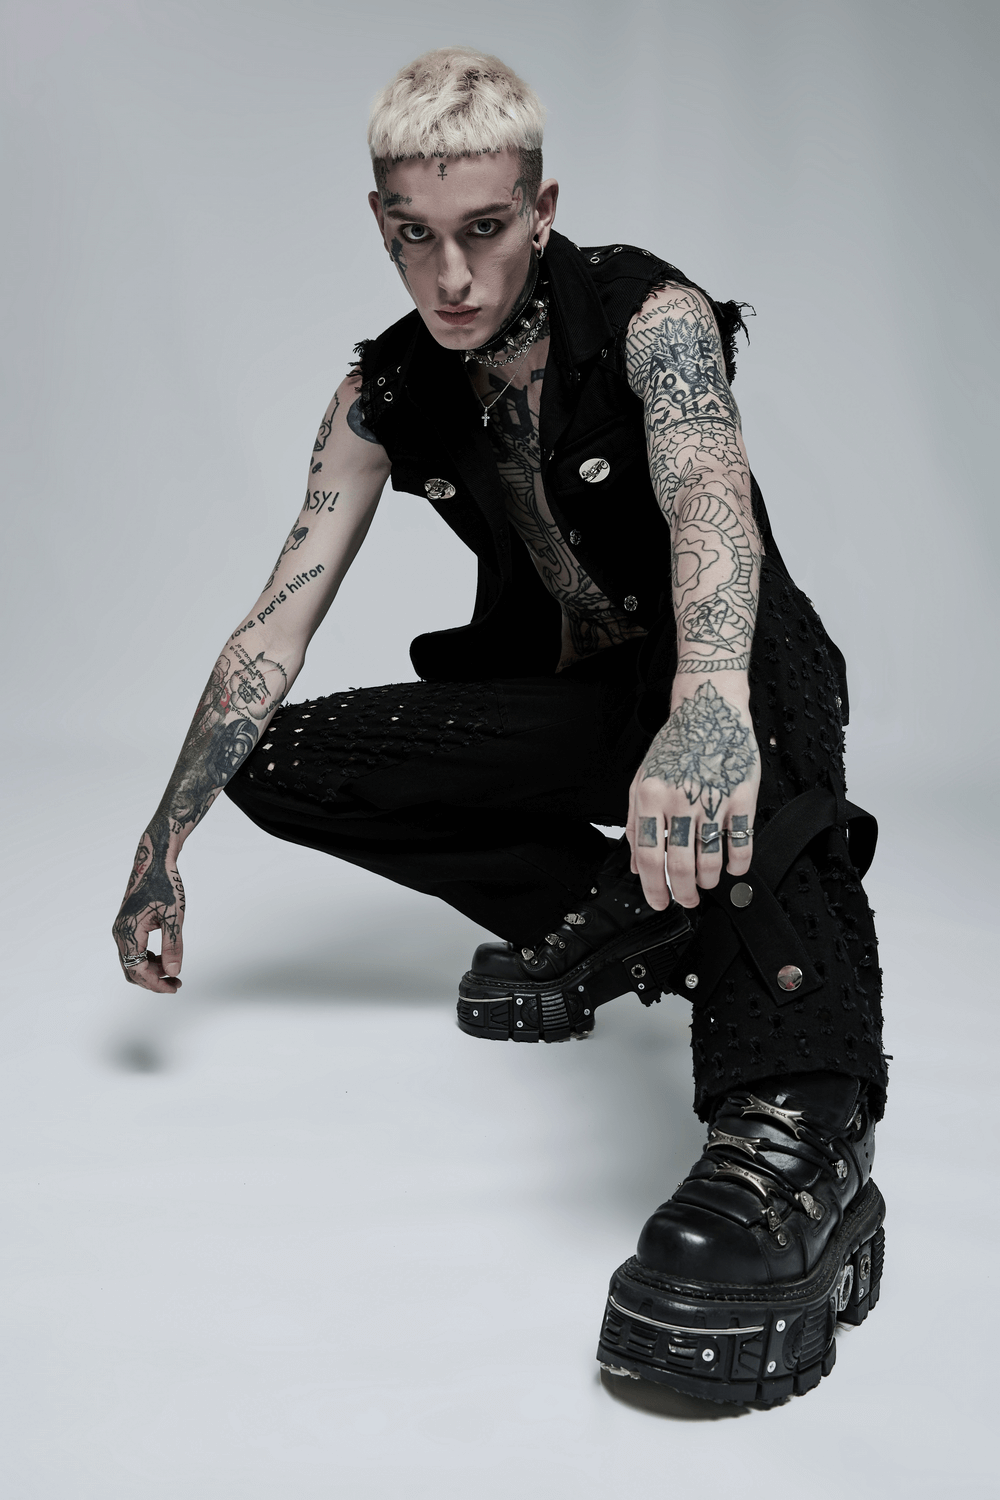 Edgy Punk Sleeveless Twill Vest with Metal Accents - HARD'N'HEAVY